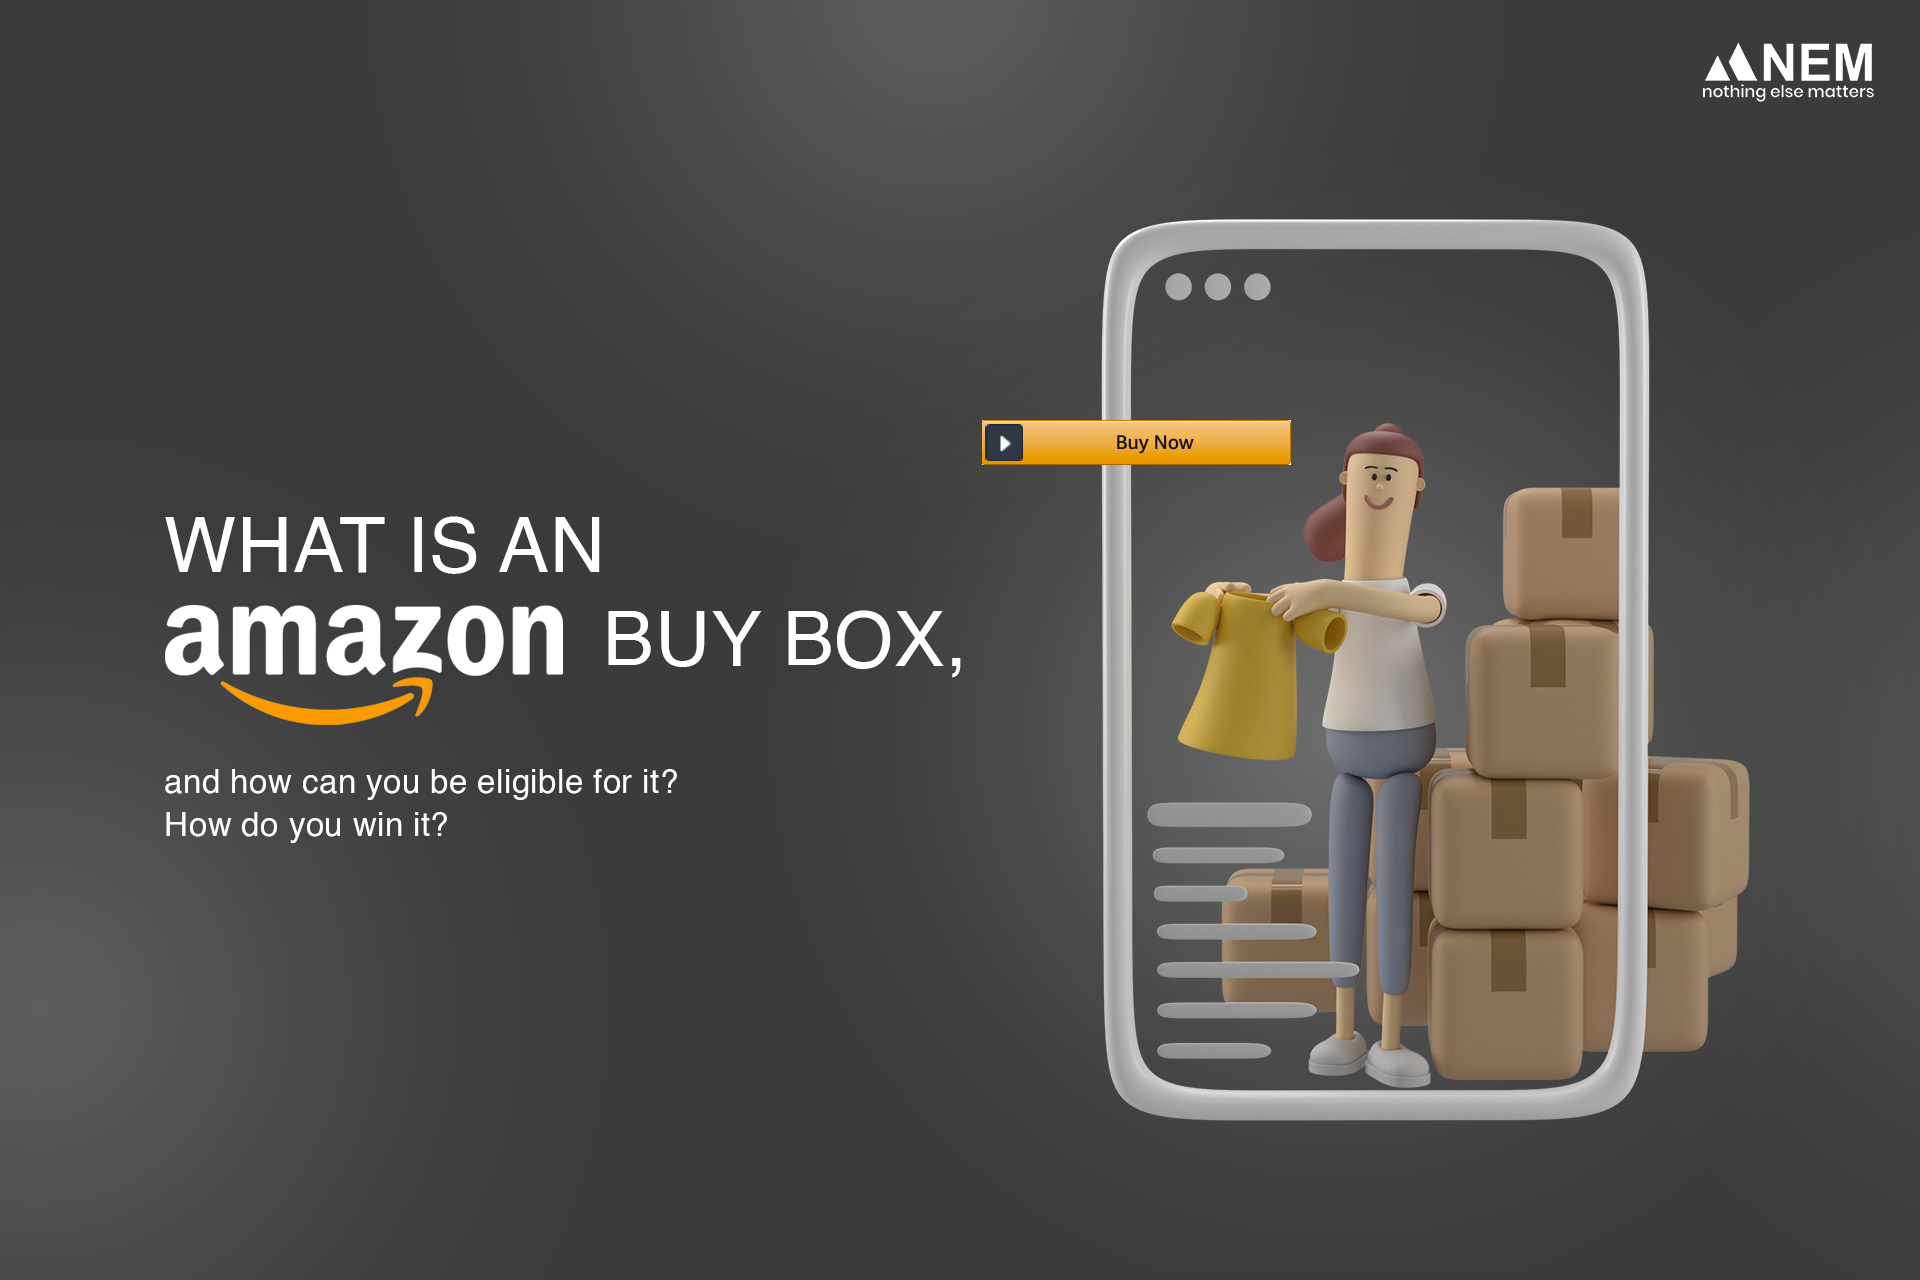 What is an Amazon Buy Box, and how can you be eligible for it? How do you win it?